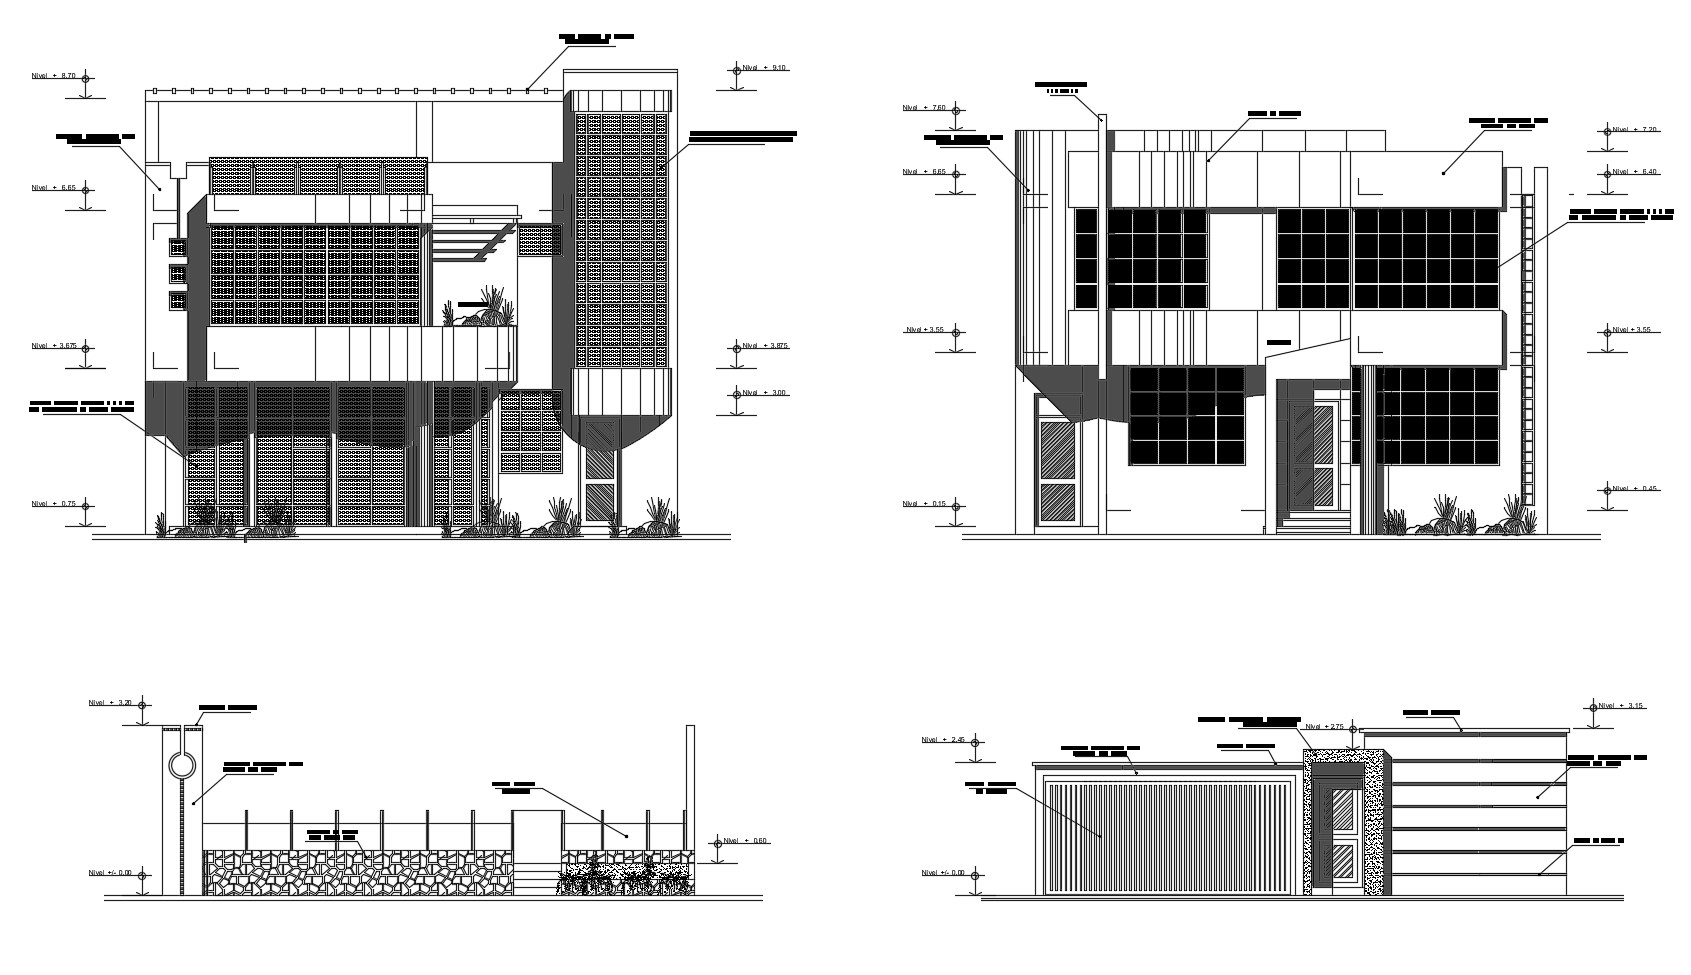 Reception Counter Plan And Elevation Design Dwg File Cadbull My Xxx Hot Girl